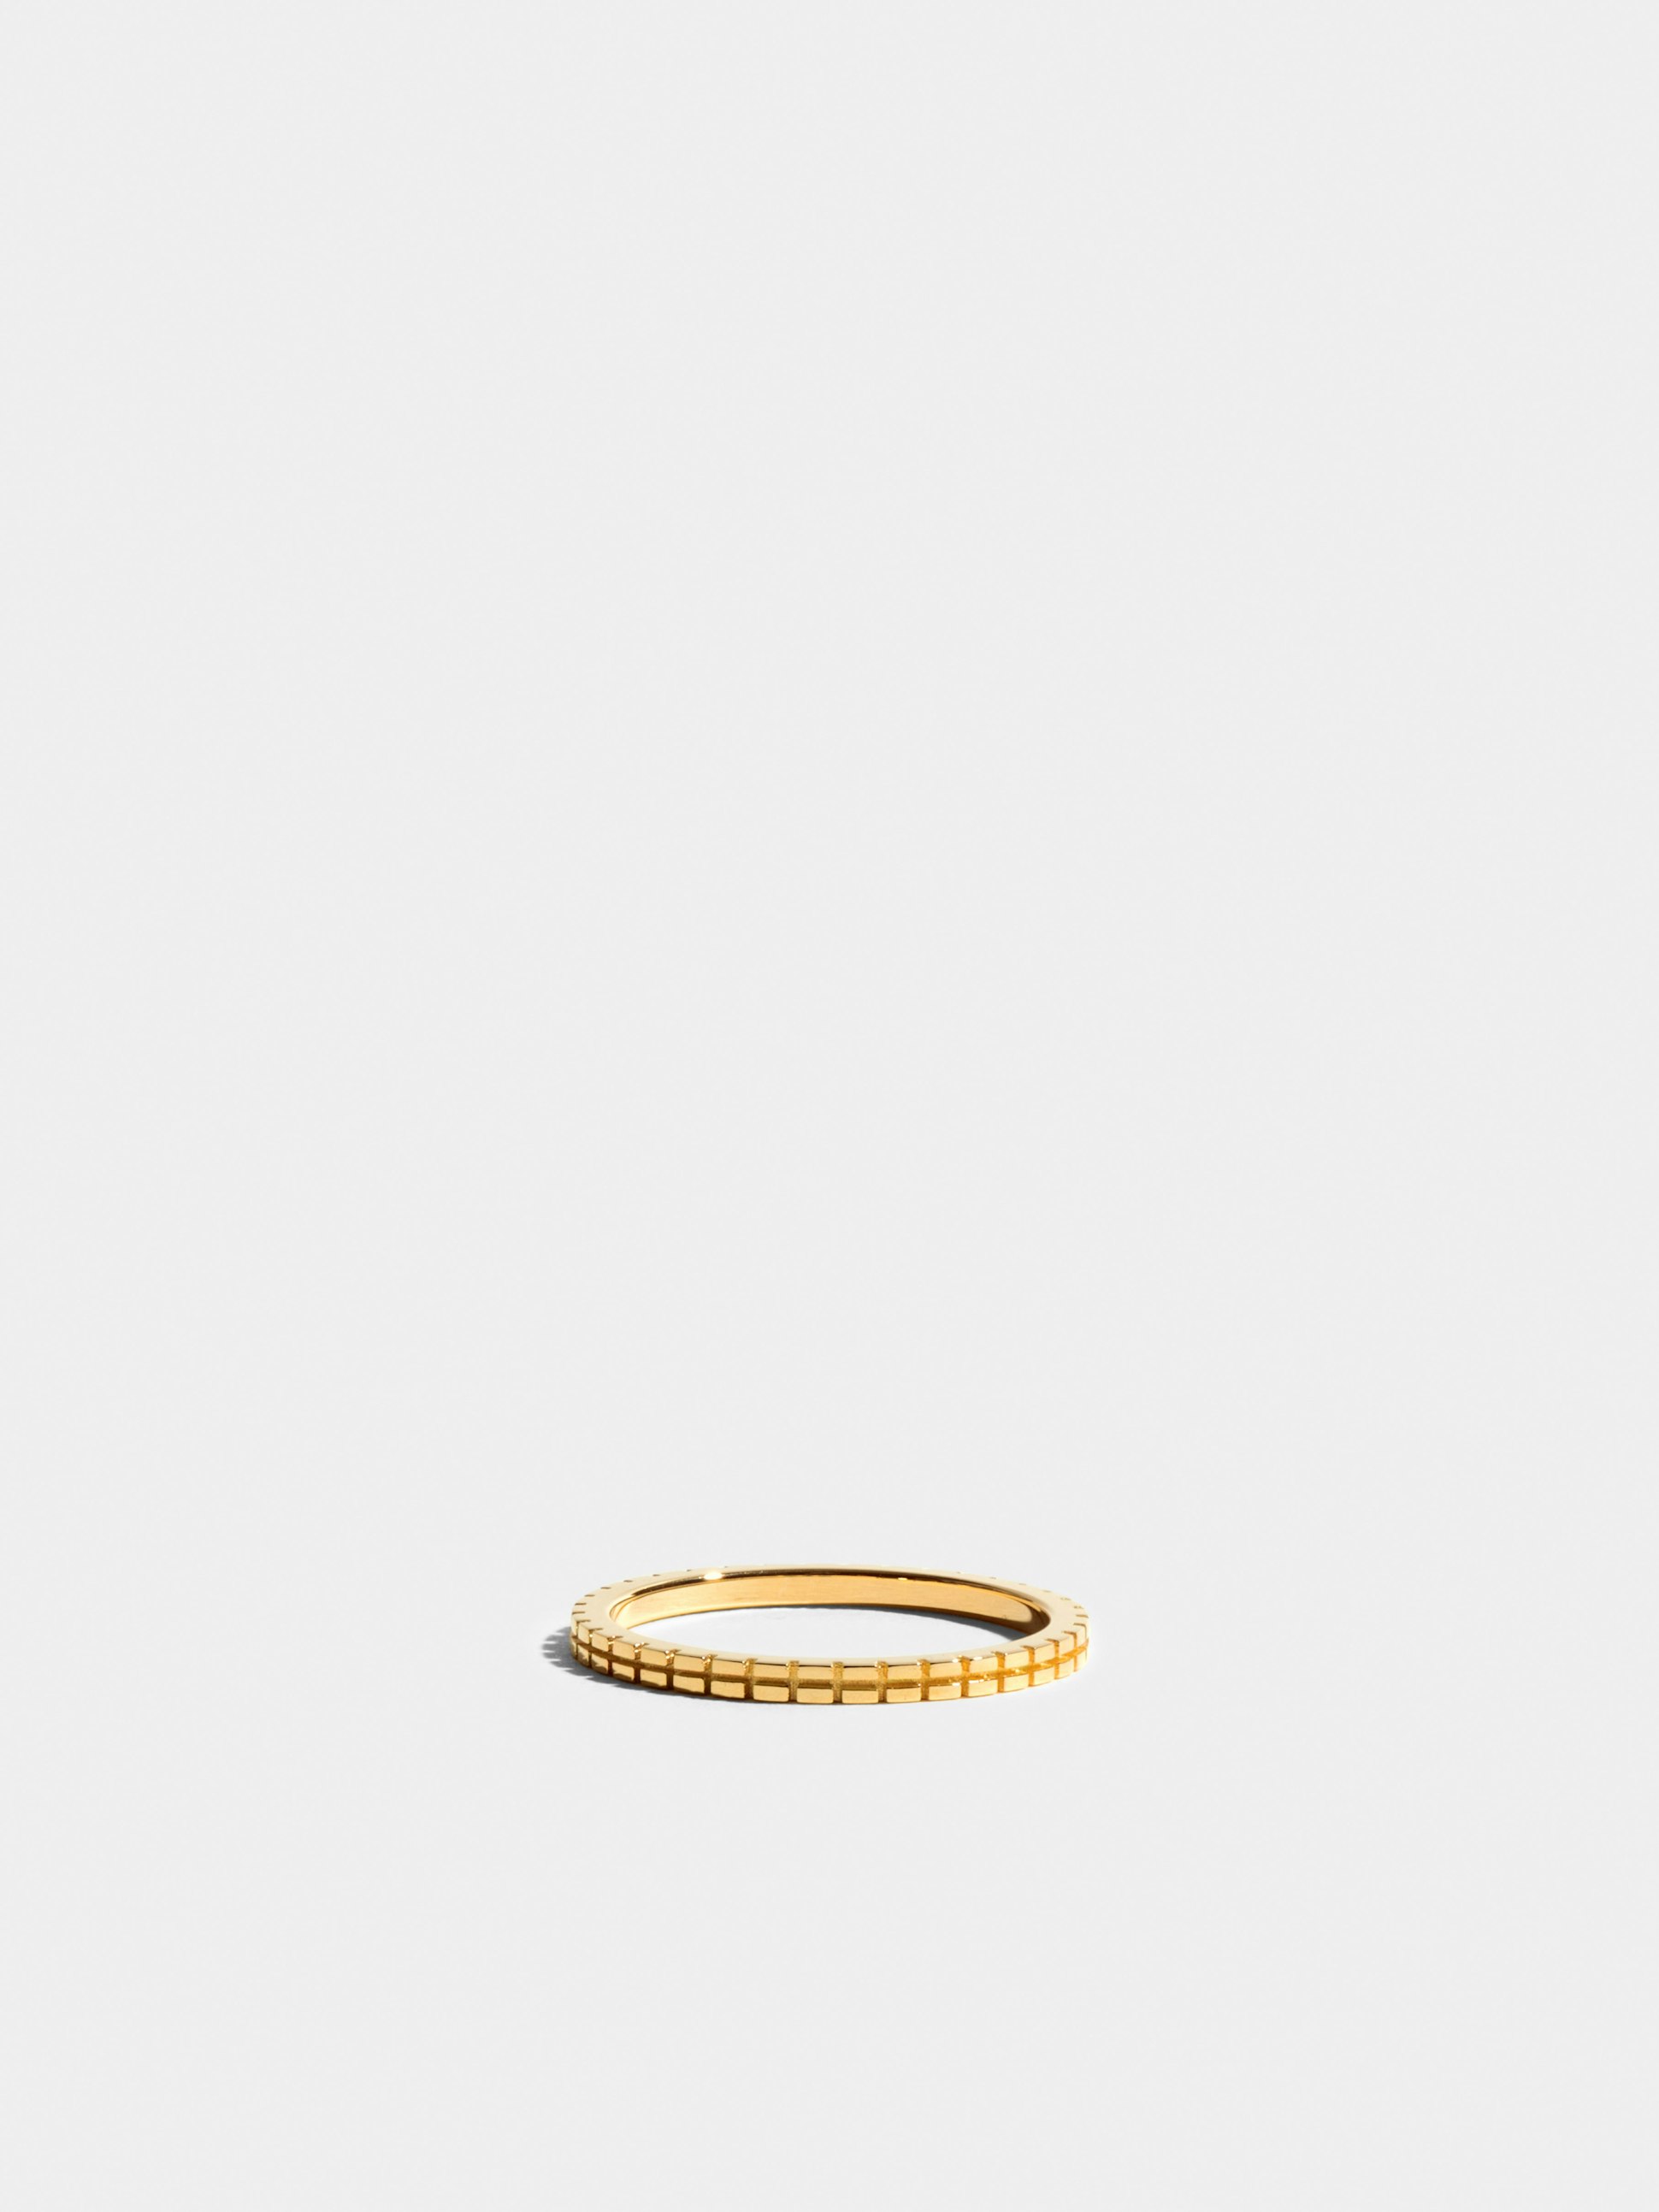 Anagramme "damier" ring in 18k Fairmined ethical yellow gold